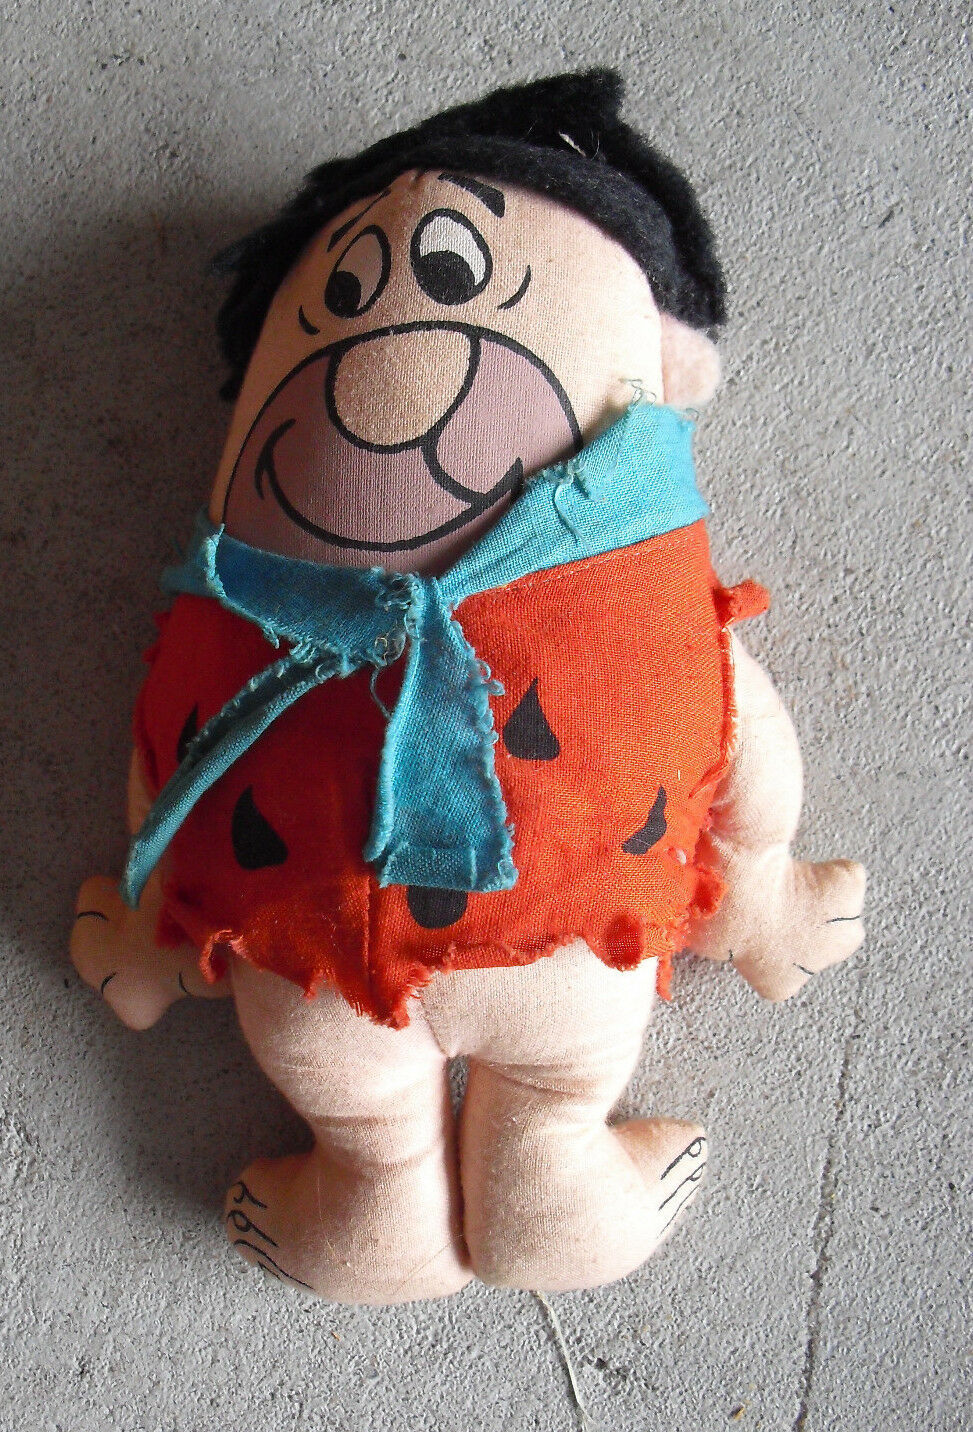 Primary image for Vintage 1970s Knickerbocker Cloth Fred Flintstone Doll 6 1/2" Tall